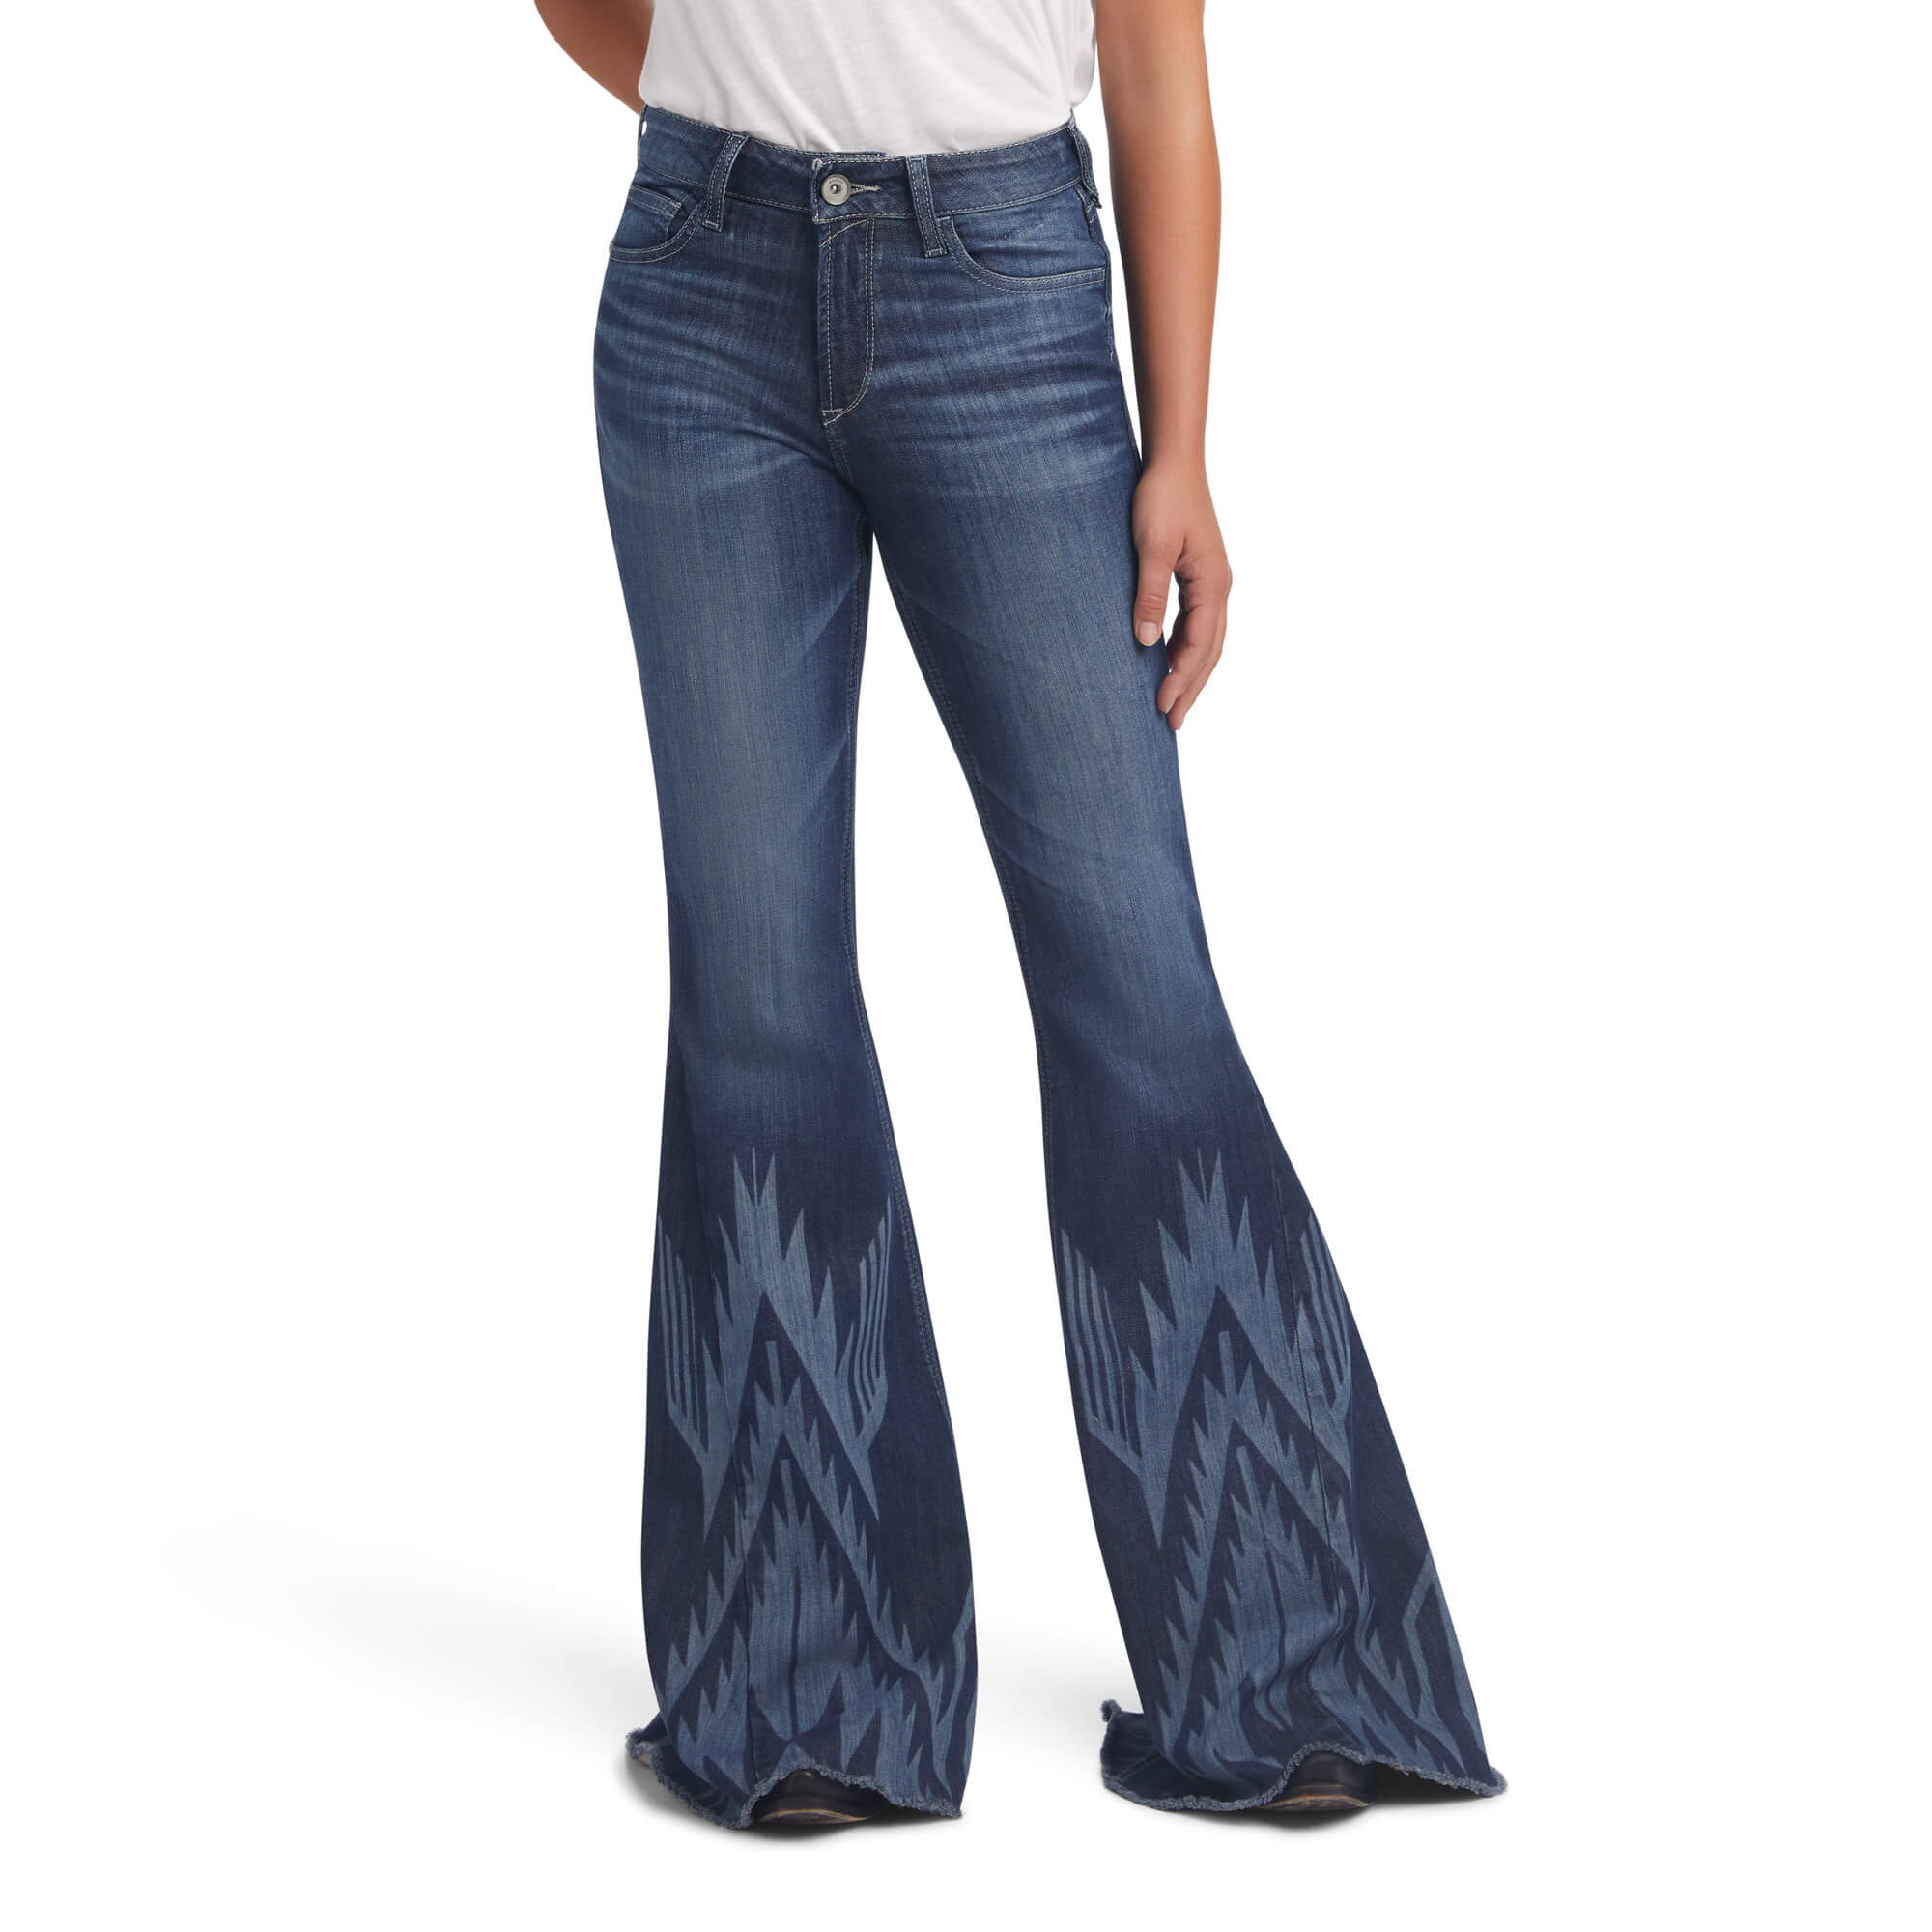 Ariat Women's Chimayo High-Rise Extreme Flare Jean